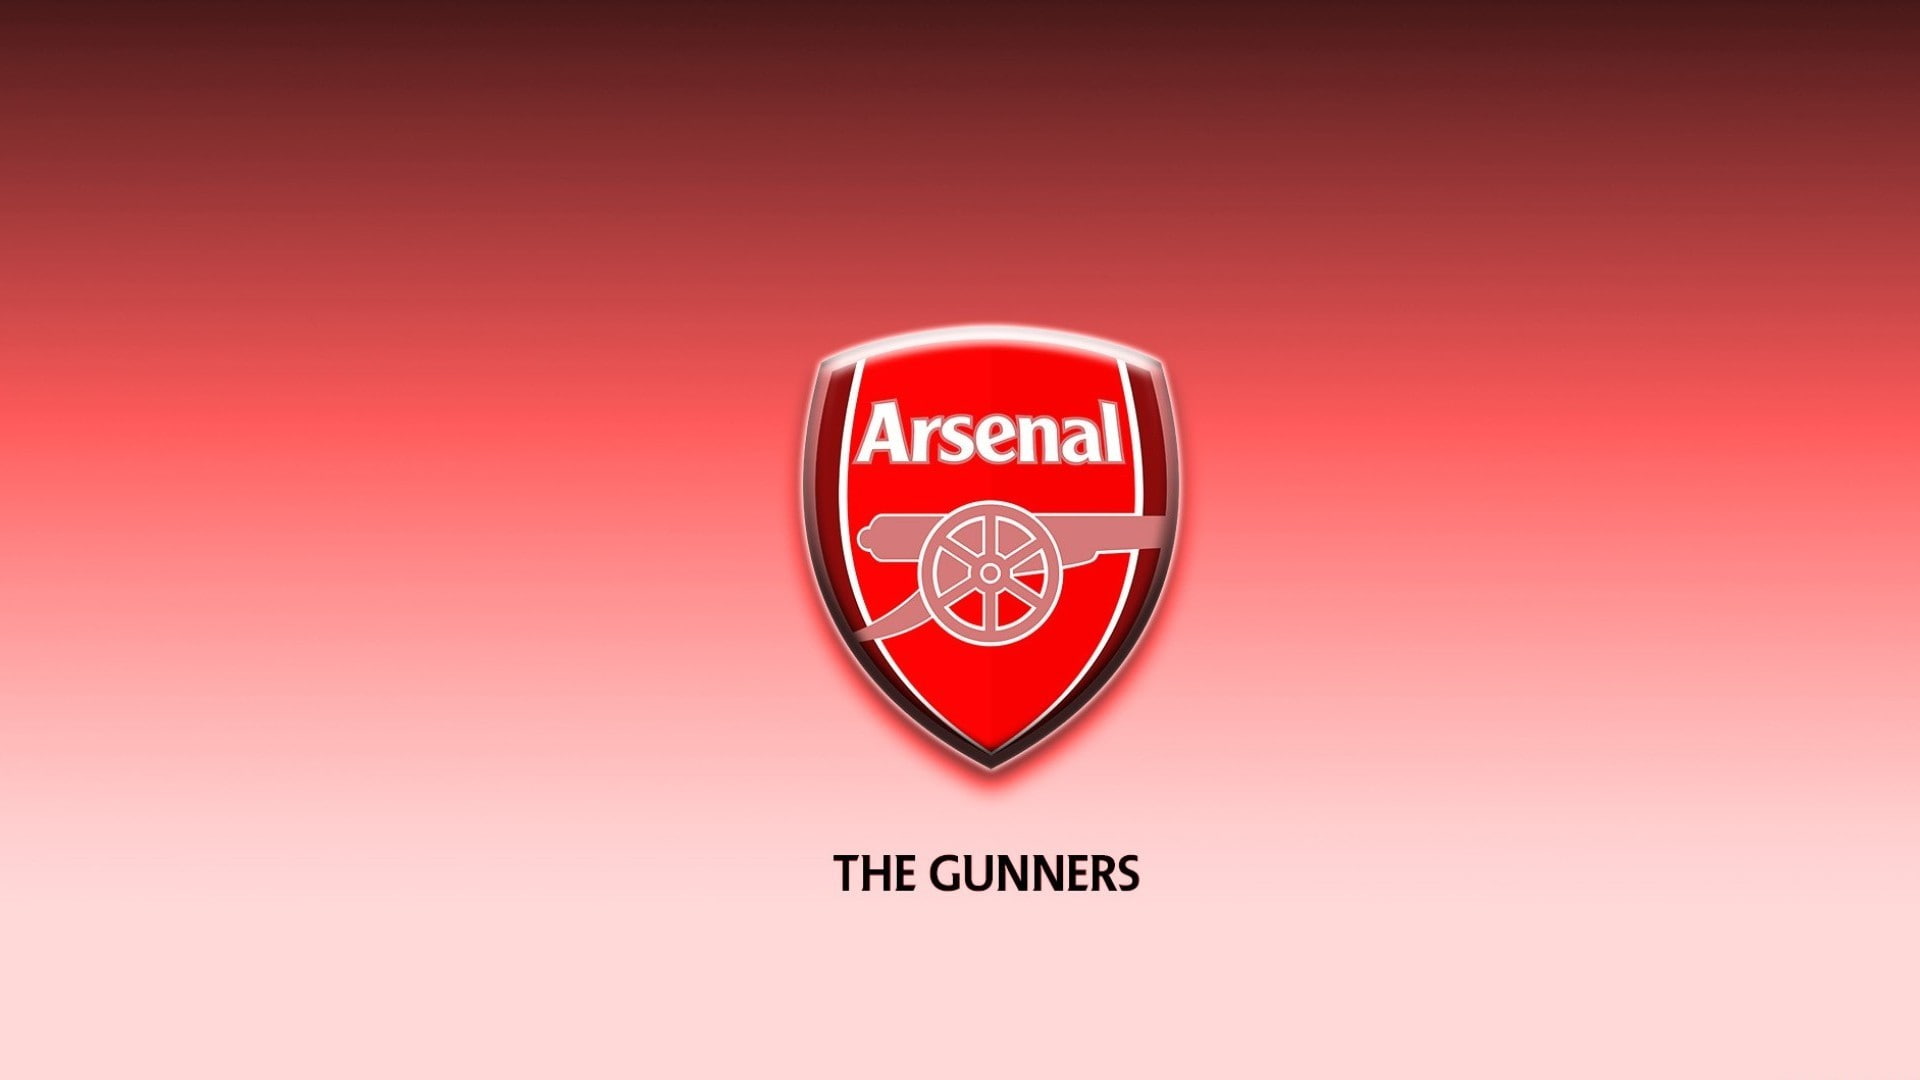 Arsenal, logo, simple background, sport, text, red, communication